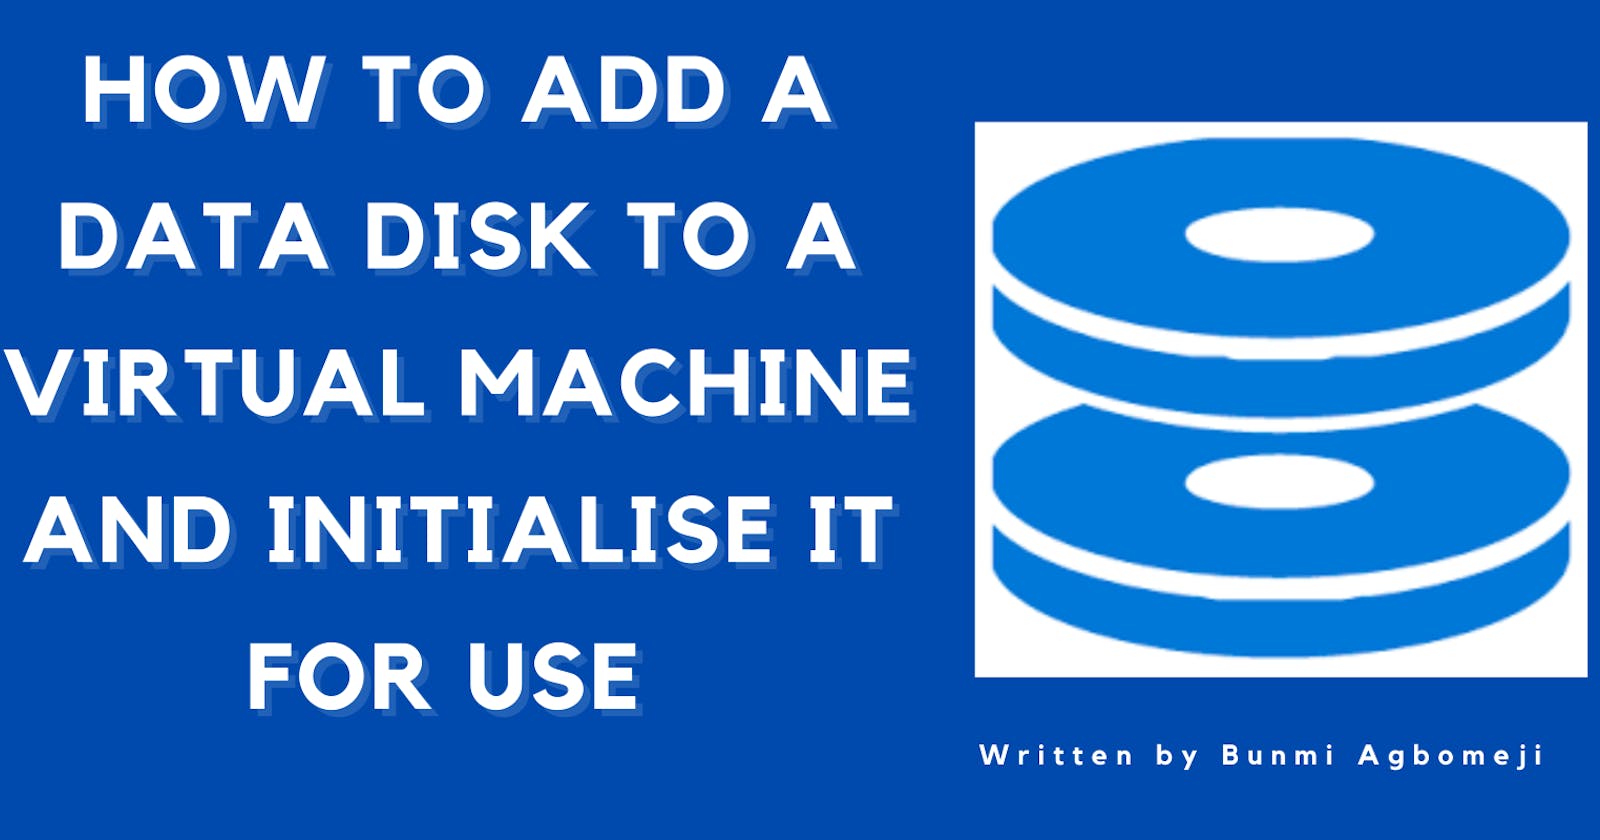 How To Add A Data Disk To A Virtual Machine And Initialise  It For Use